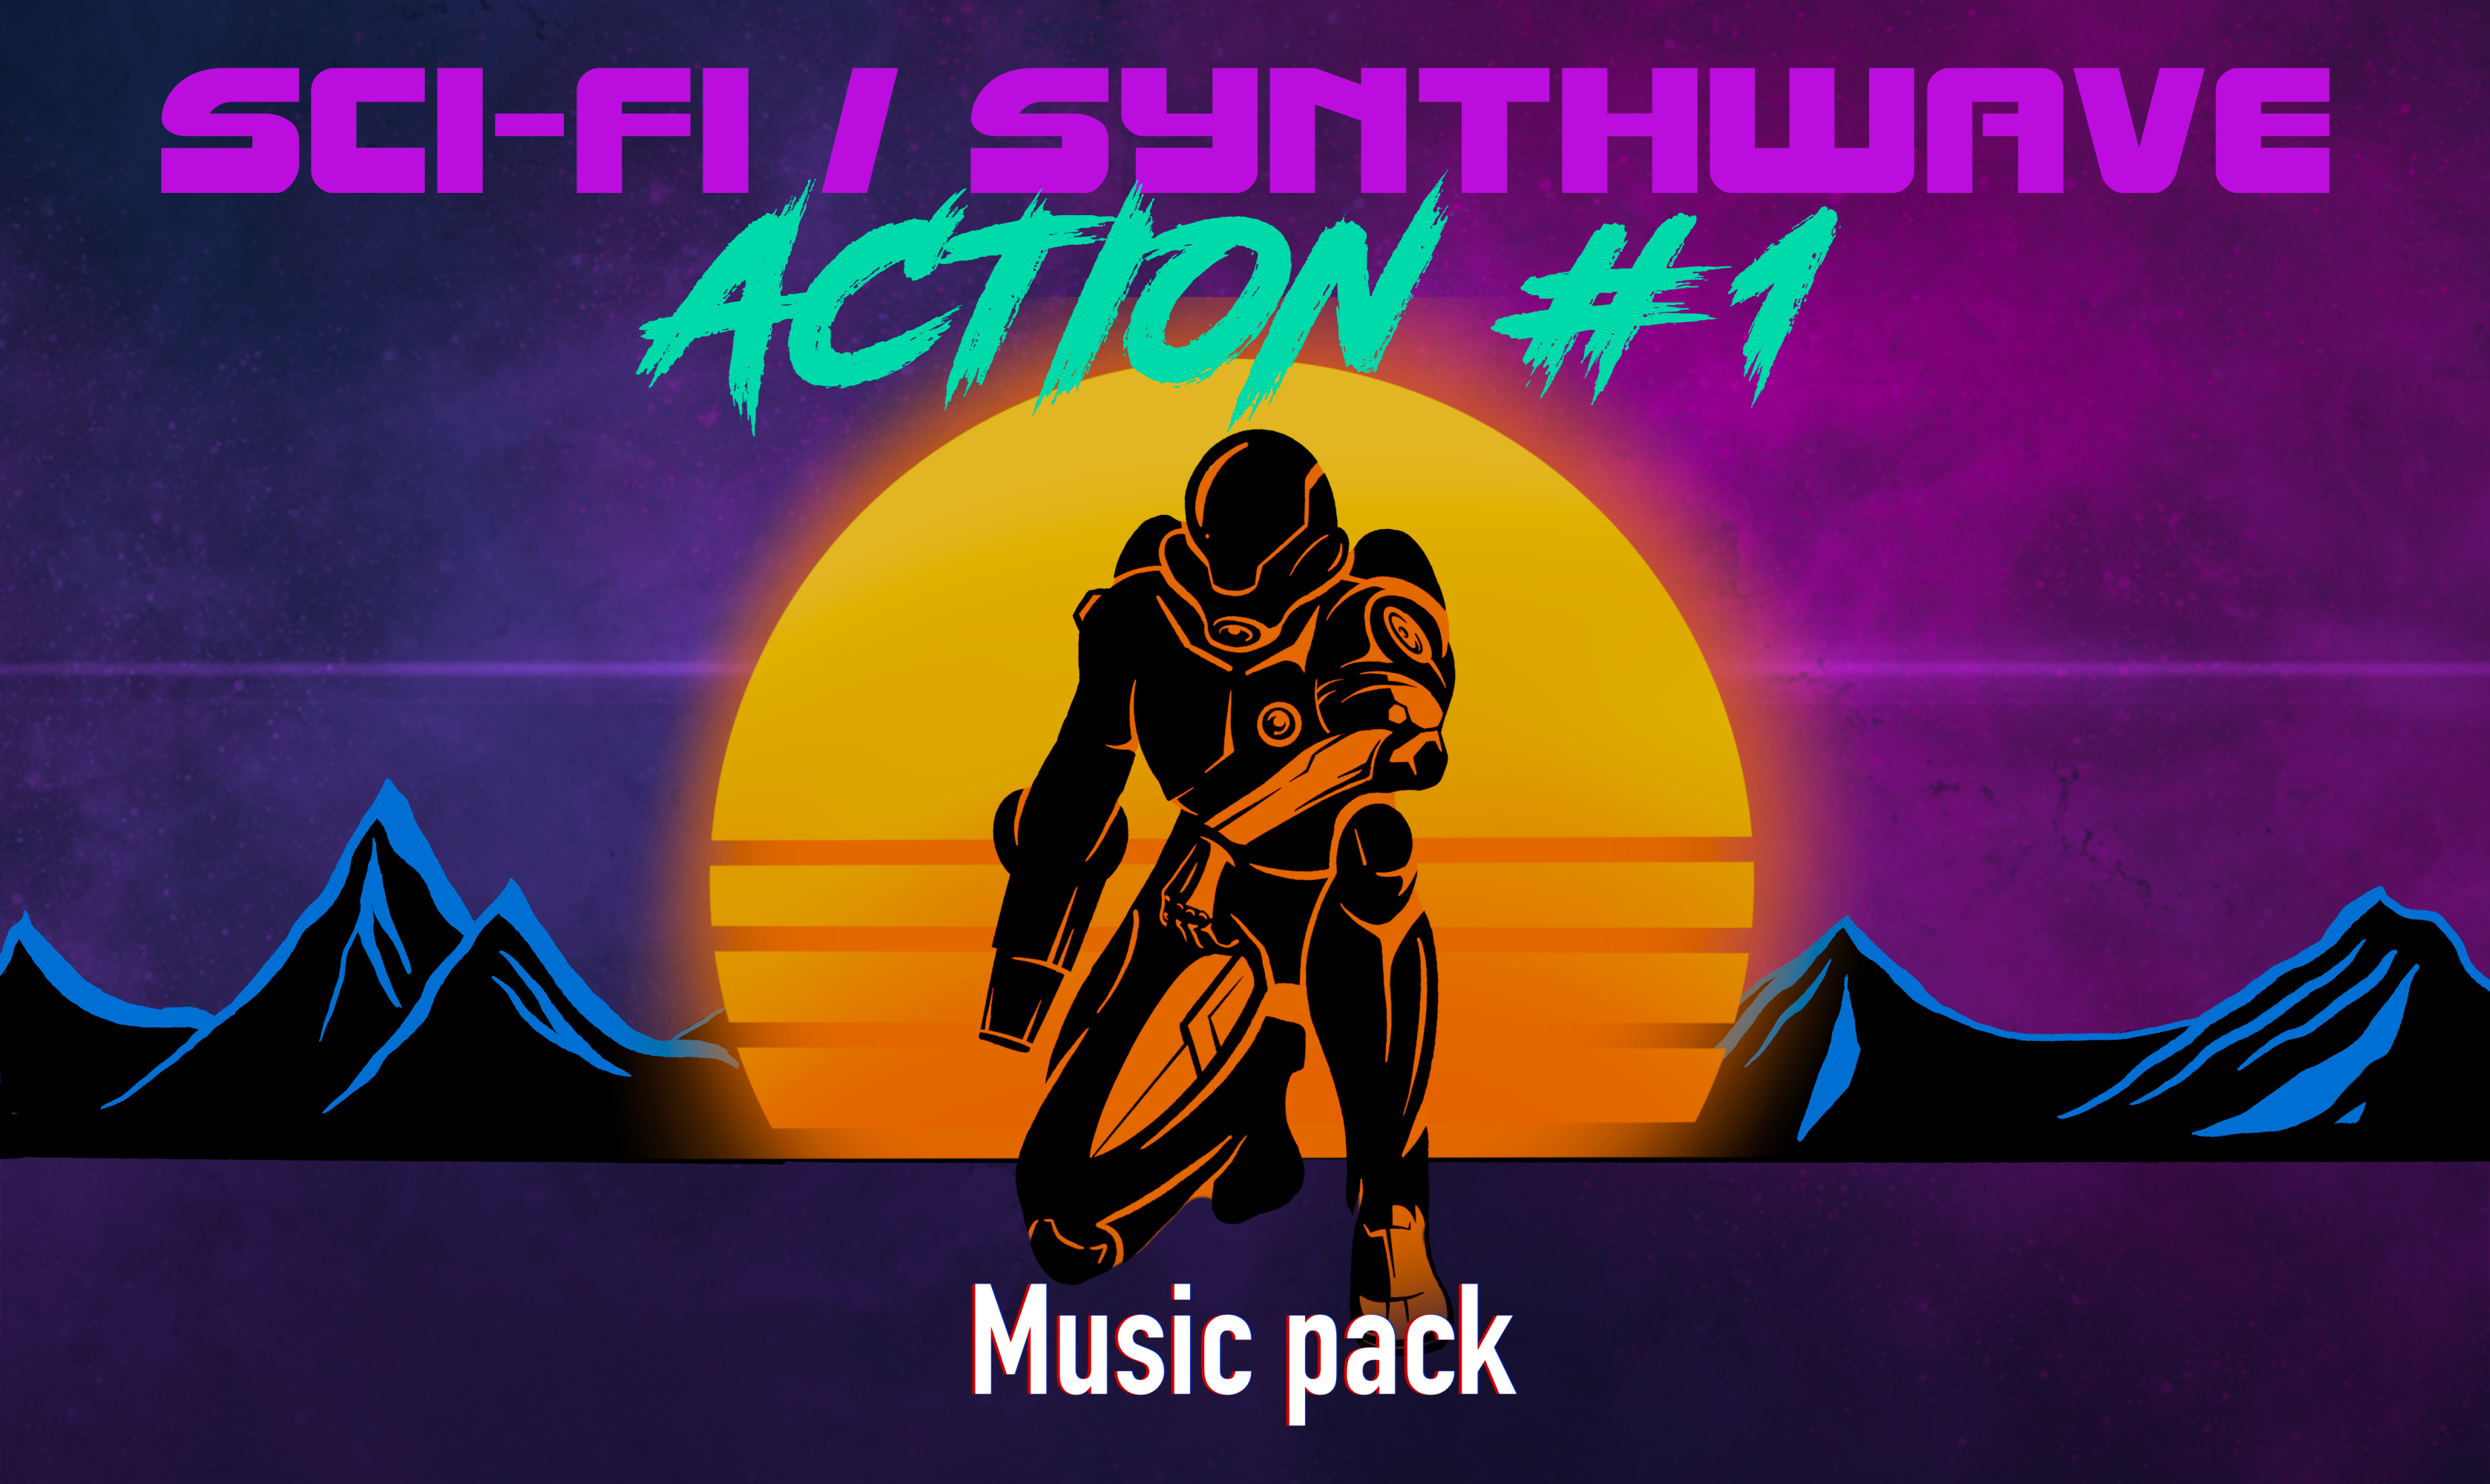 Sci - Fi / Synthwave Action #1 (Music Pack)